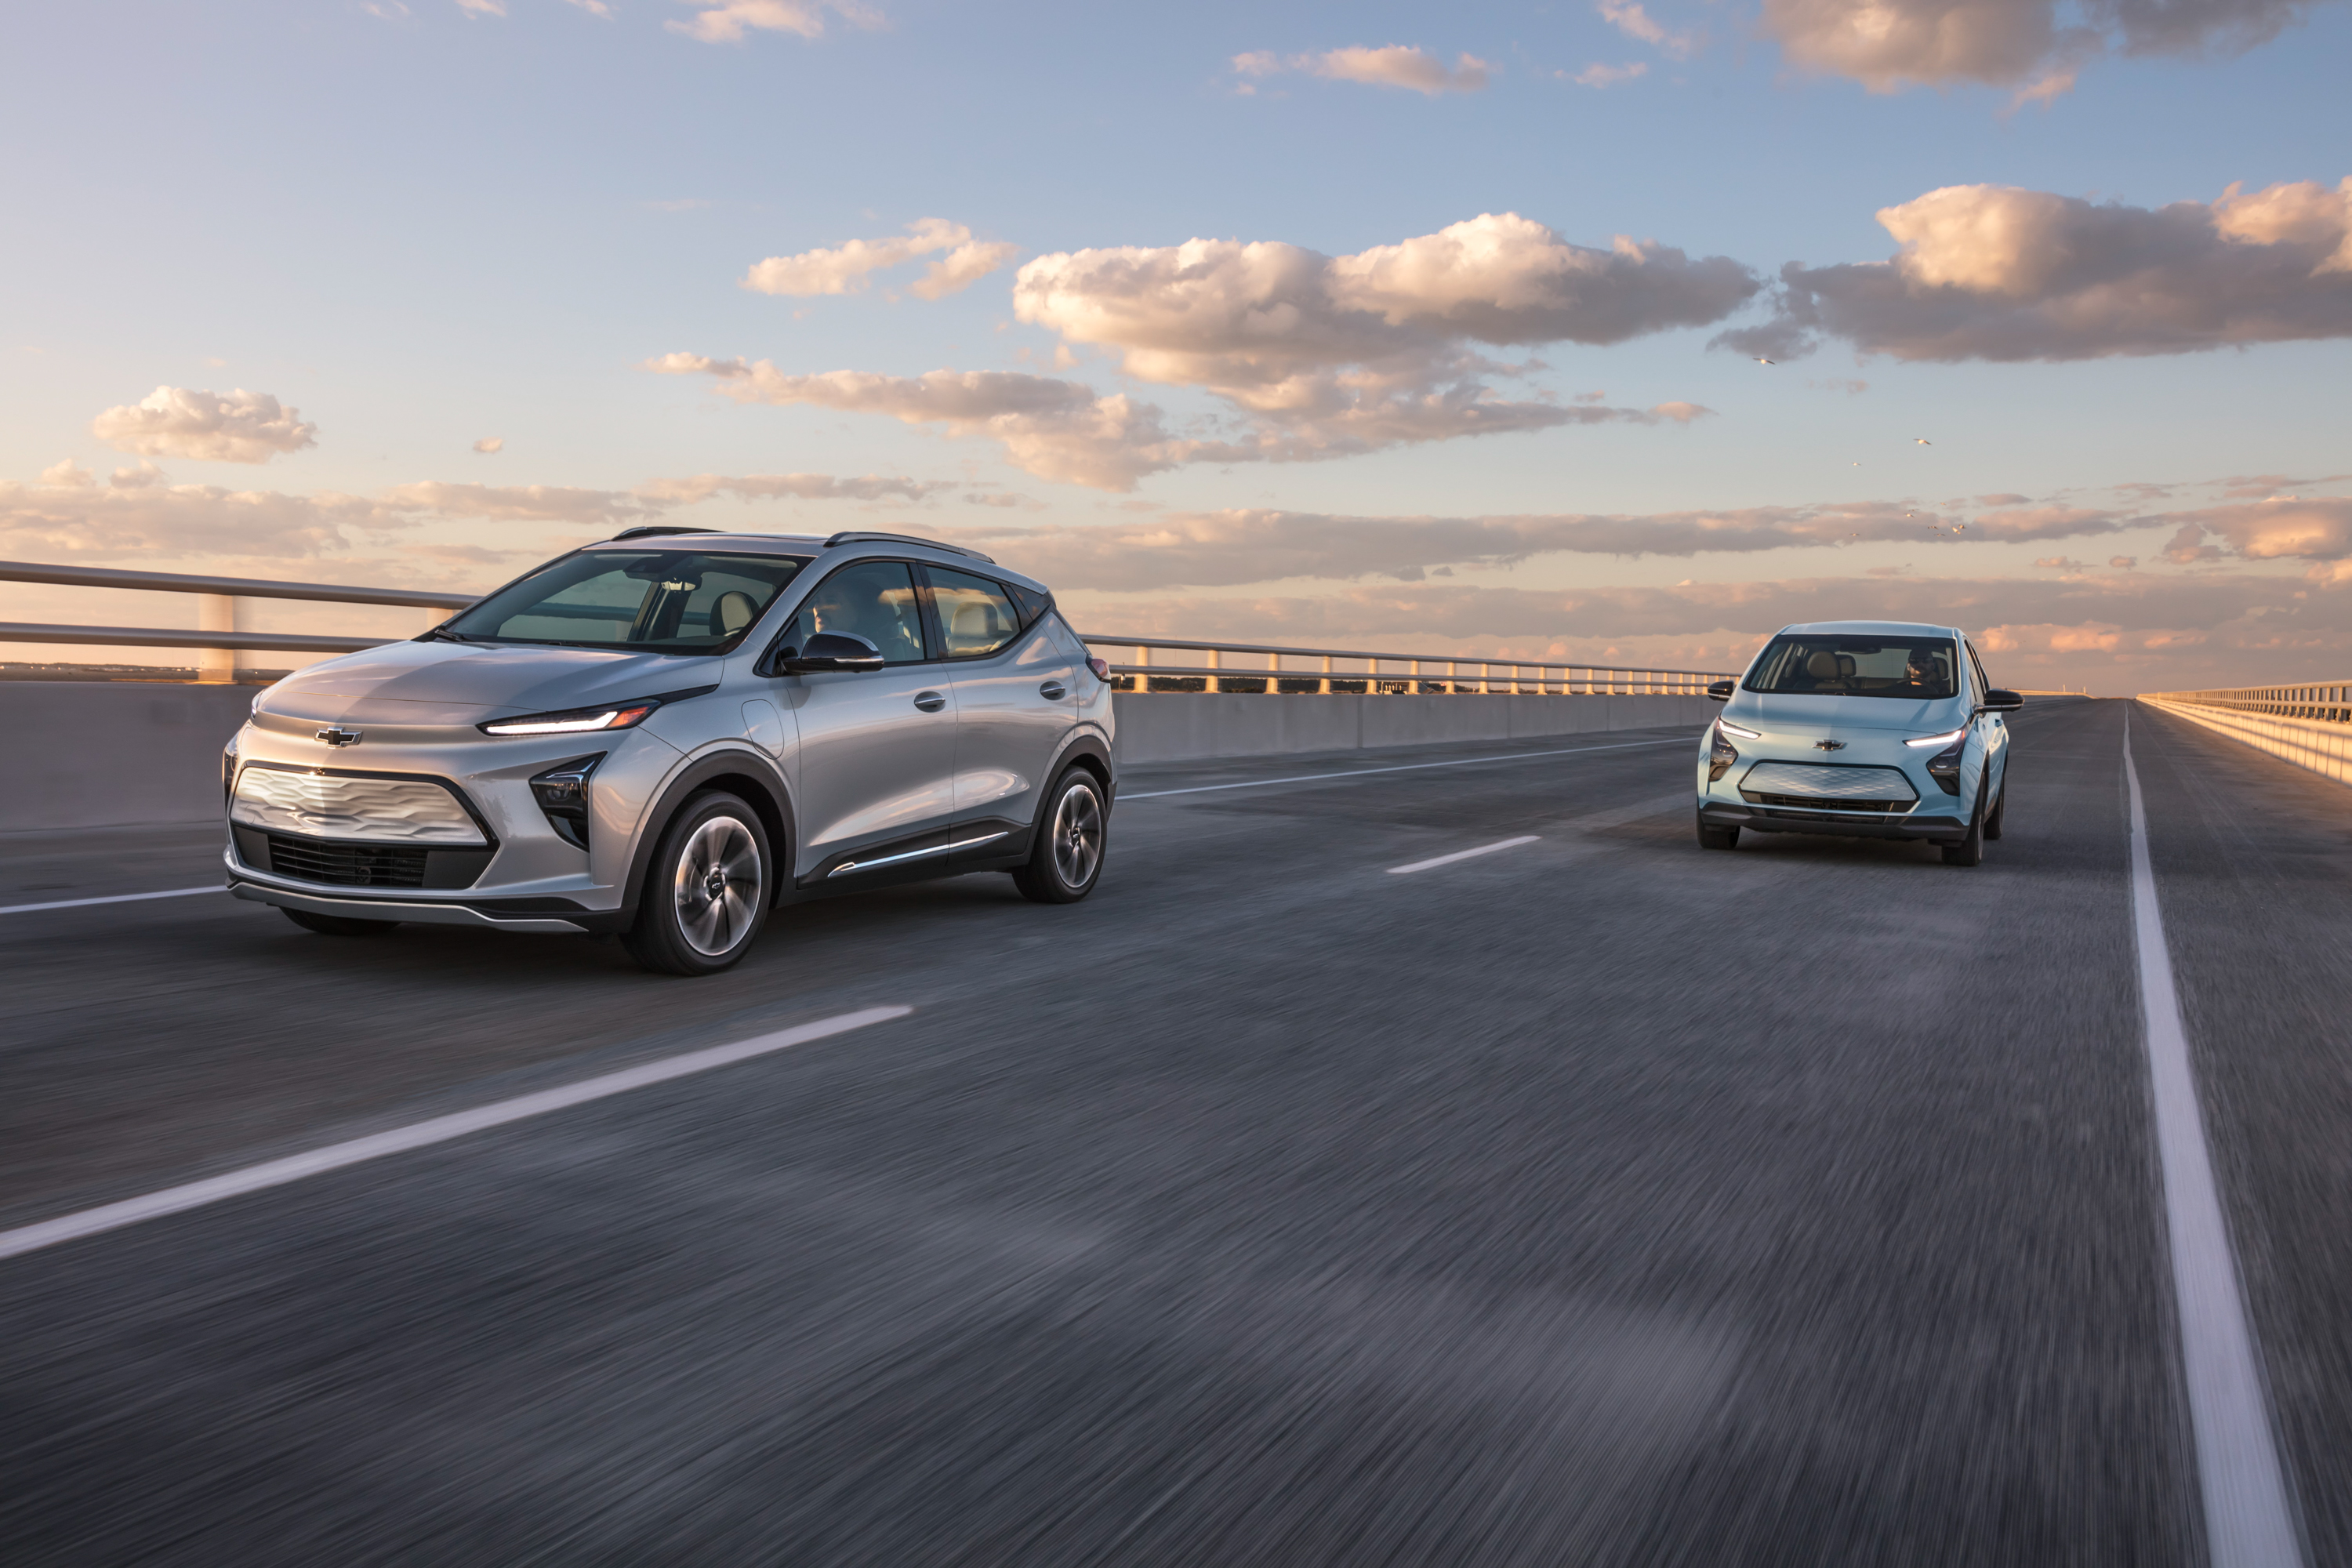 On the left is the 2022 Chevrolet Bolt EUV. On the right, the 2022 Chevrolet Bolt EV